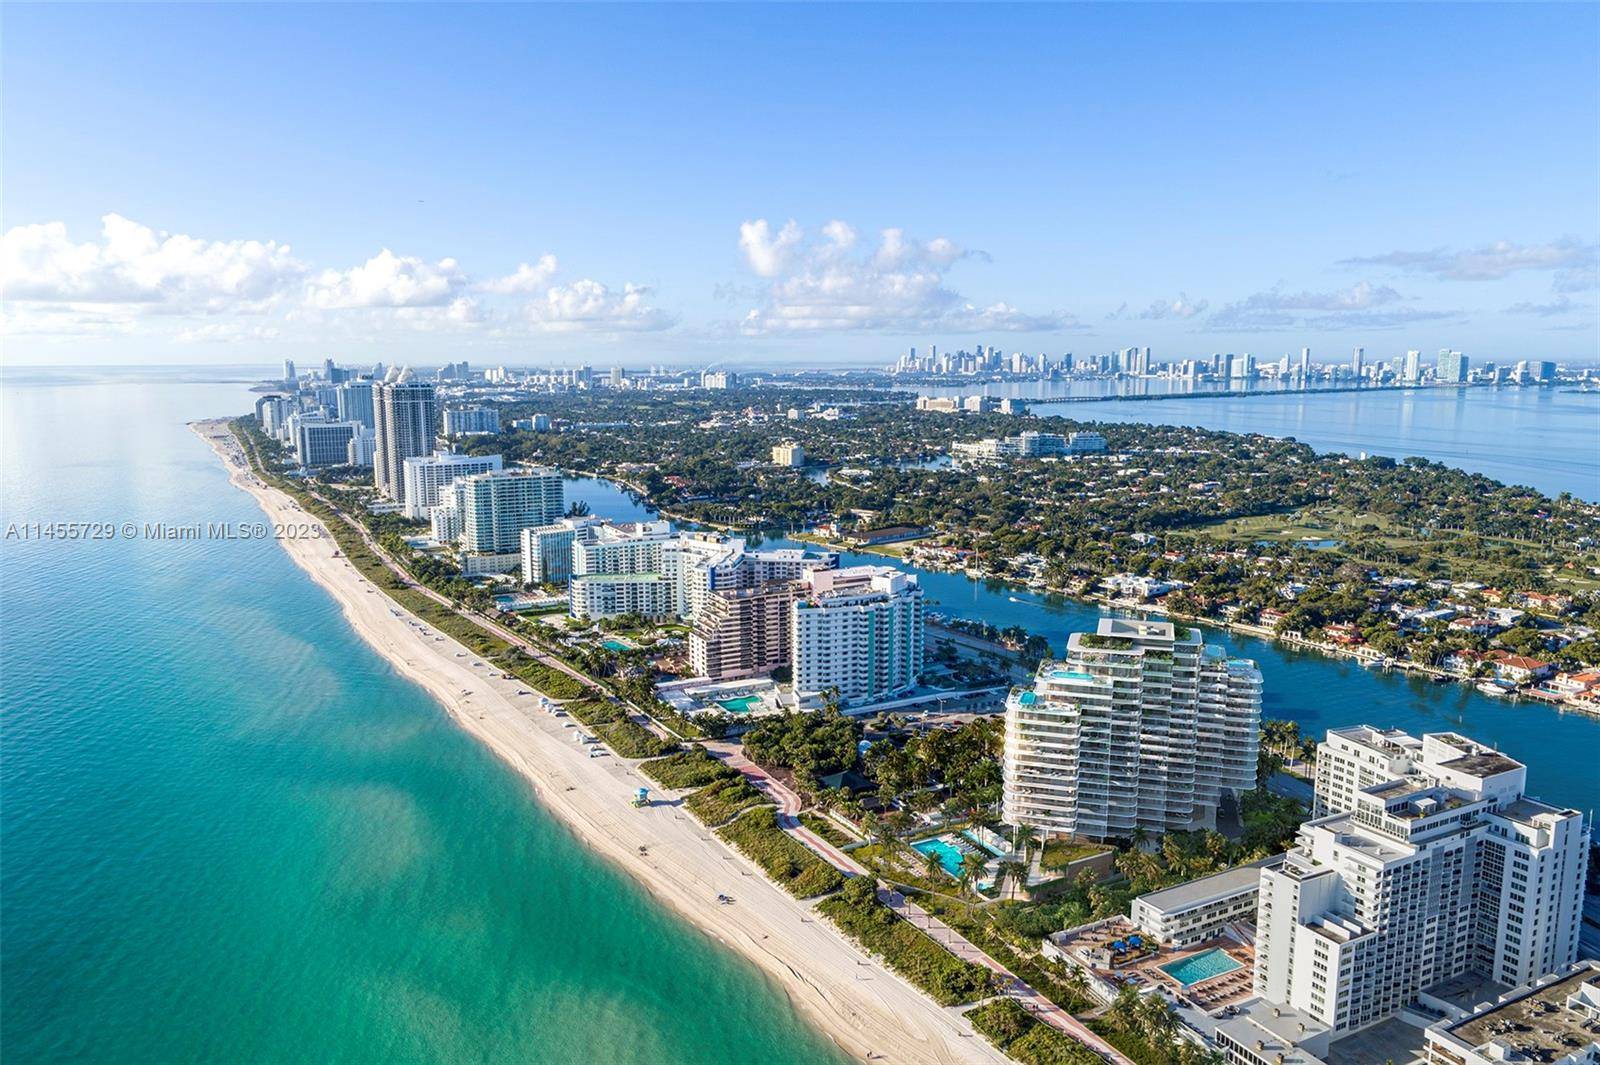 The Perigon Miami Beach the newest ON THE SAND property to be developed in Miami Beach at 5333 Collins Ave.